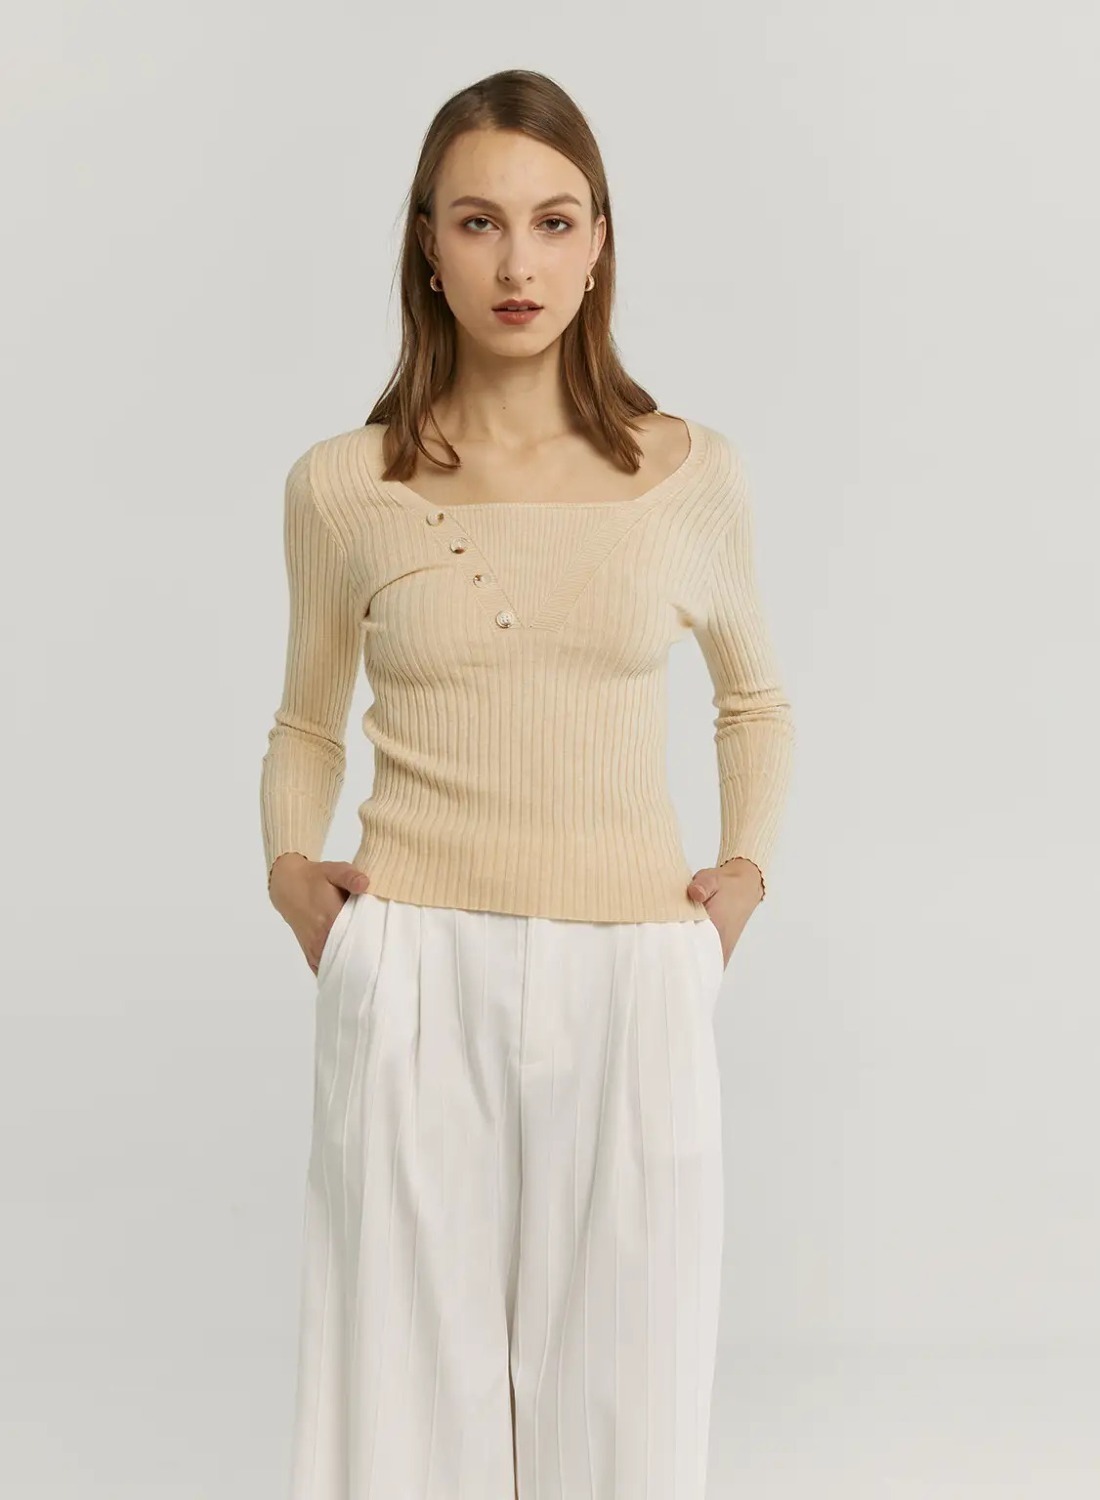 Gentle Herd 40% Off Sitewide: Women's Skinny Square-Neck Top $19.80 & More + Free Shipping